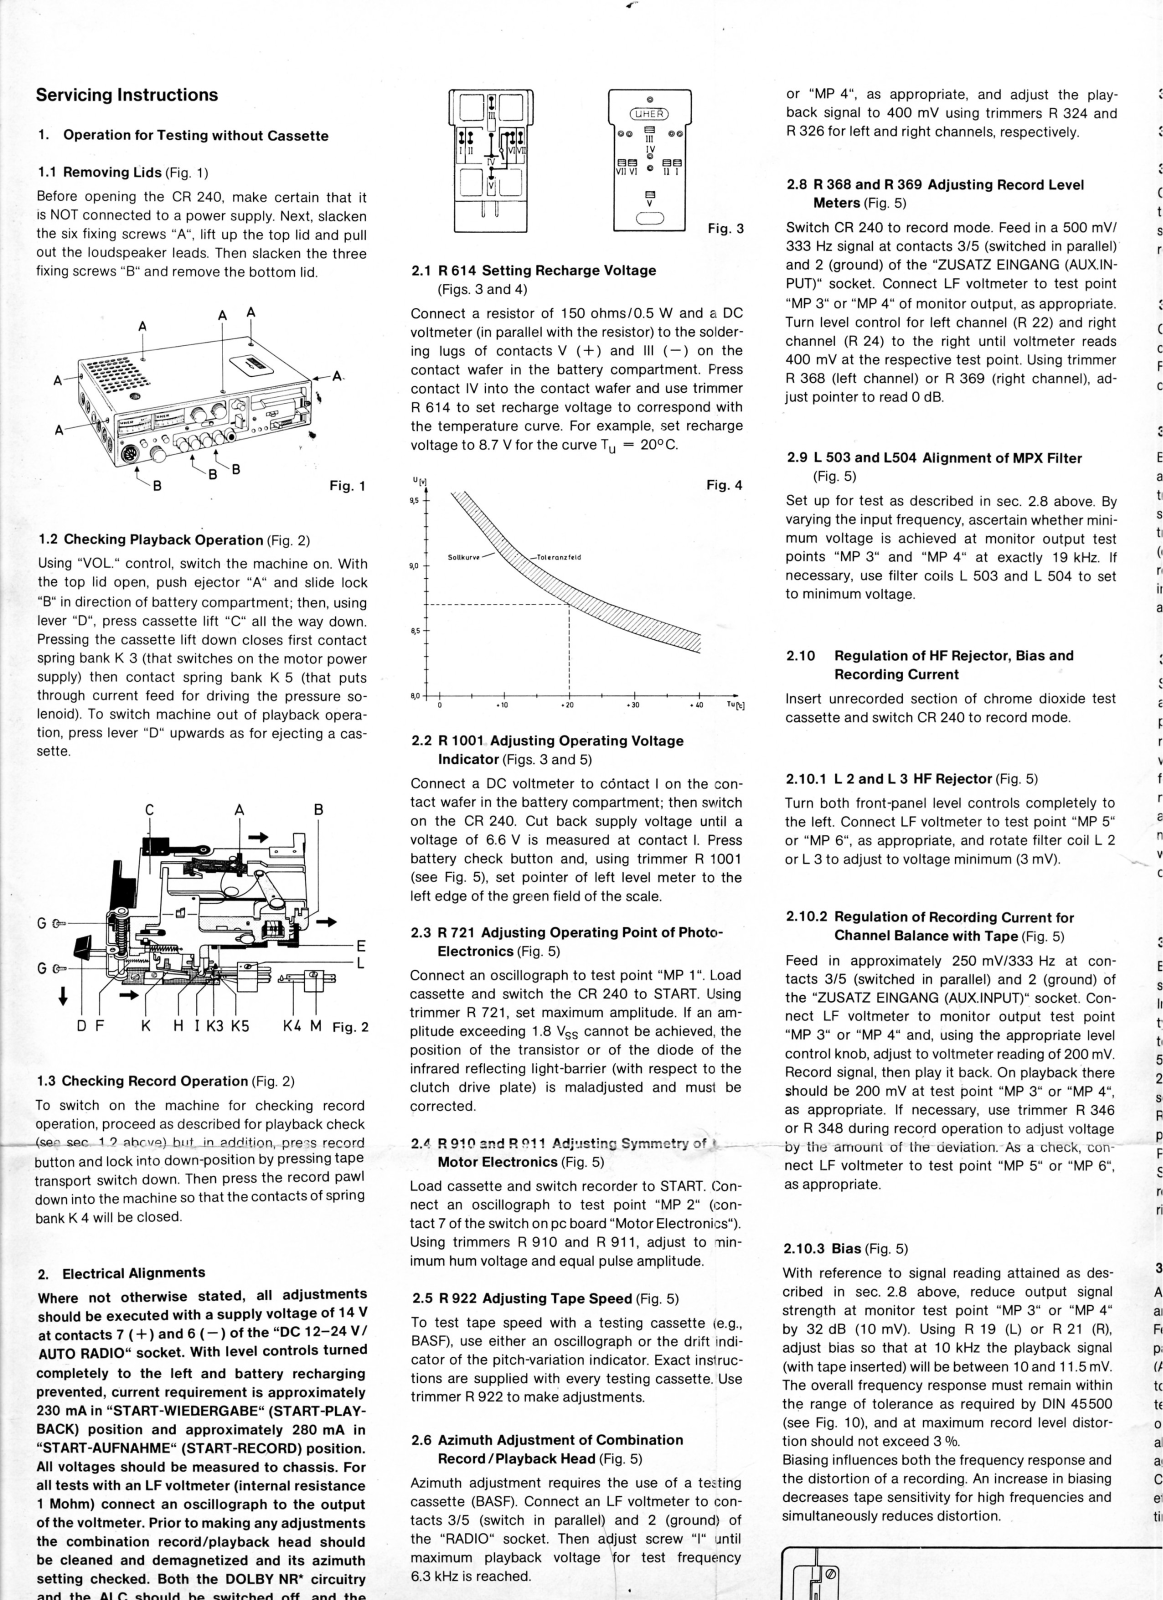 Uher CR-240 Service manual